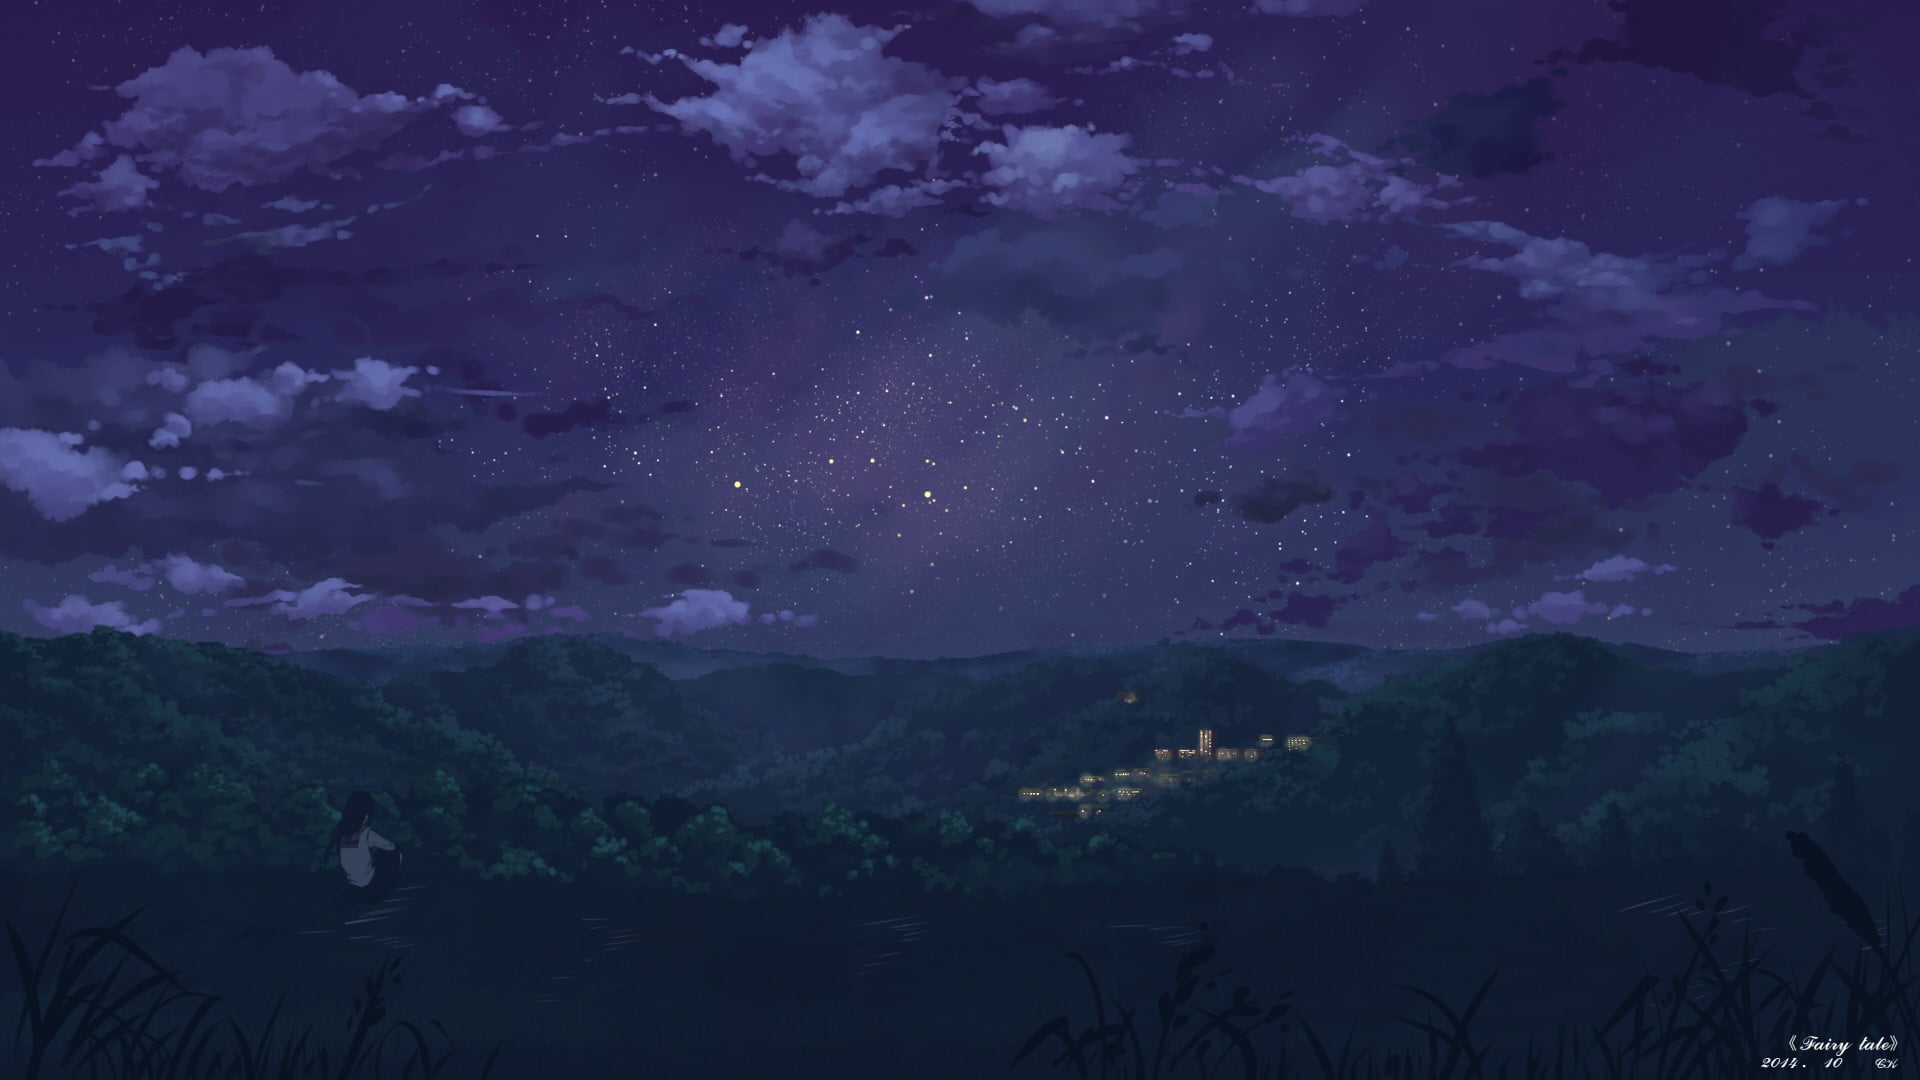 Route Night Time Background by WillDinoMaster55 on DeviantArt